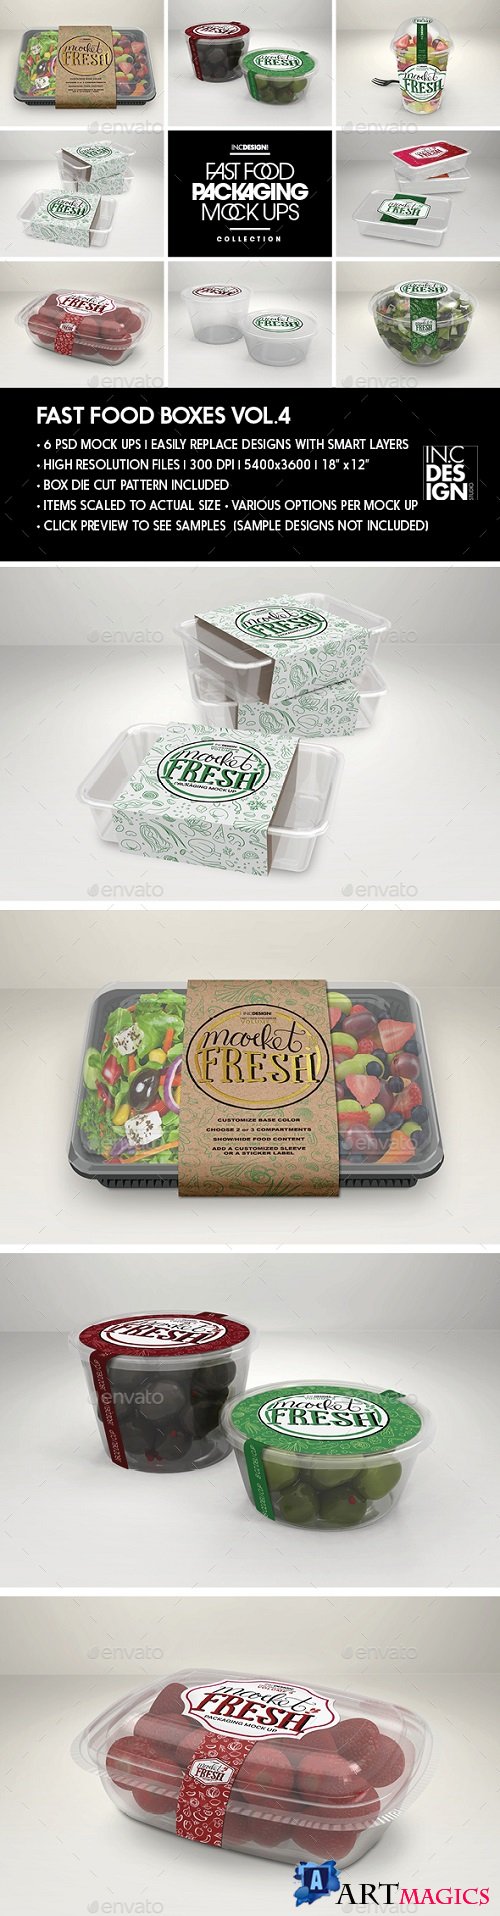 Fast Food Boxes Vol.4: Take Out Packaging MockUps - 17969199